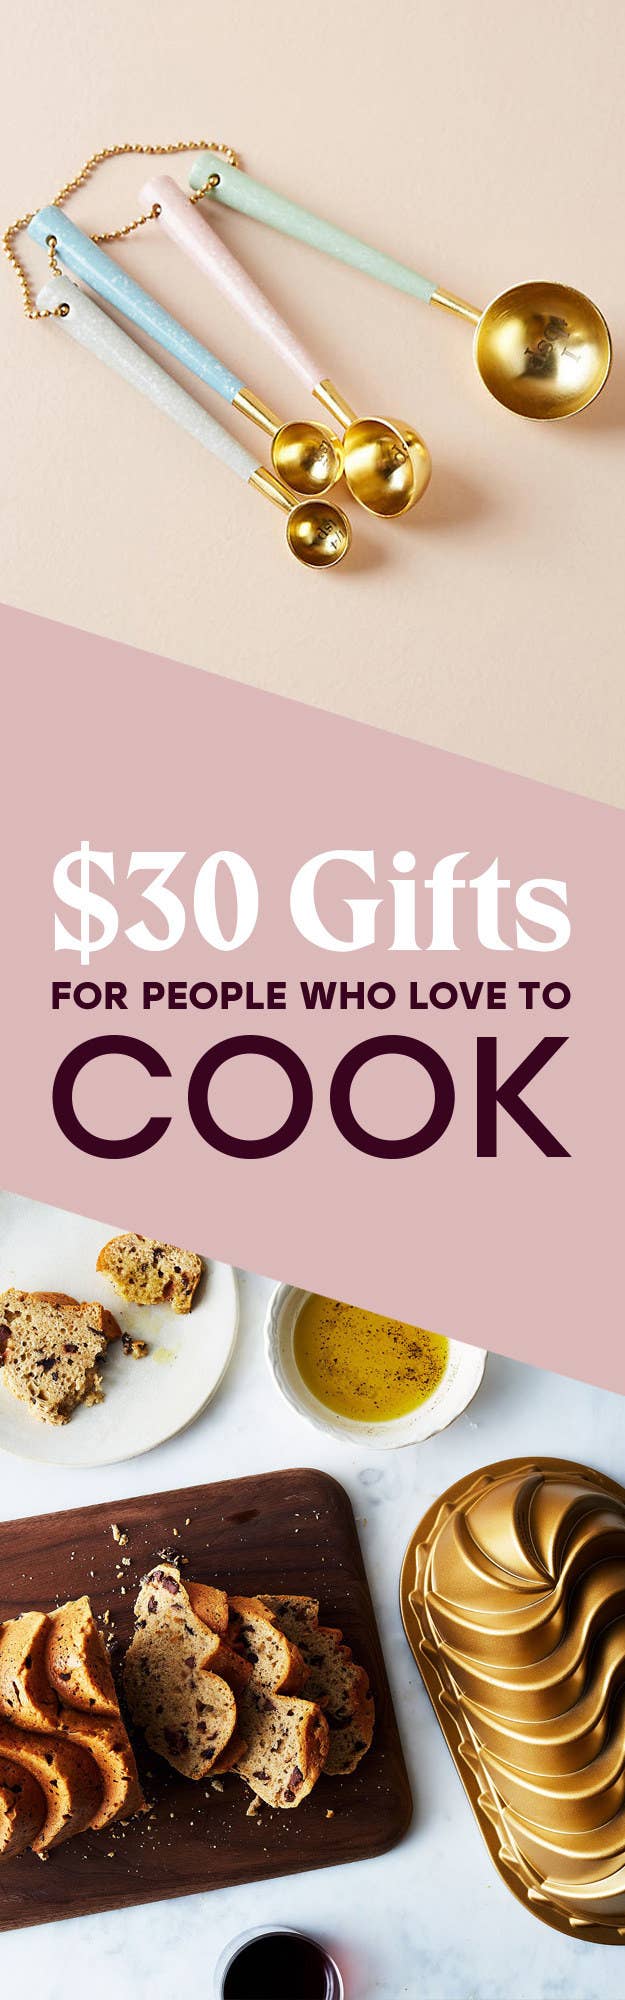 26 Best Gifts for Chefs & People Who Love to Cook